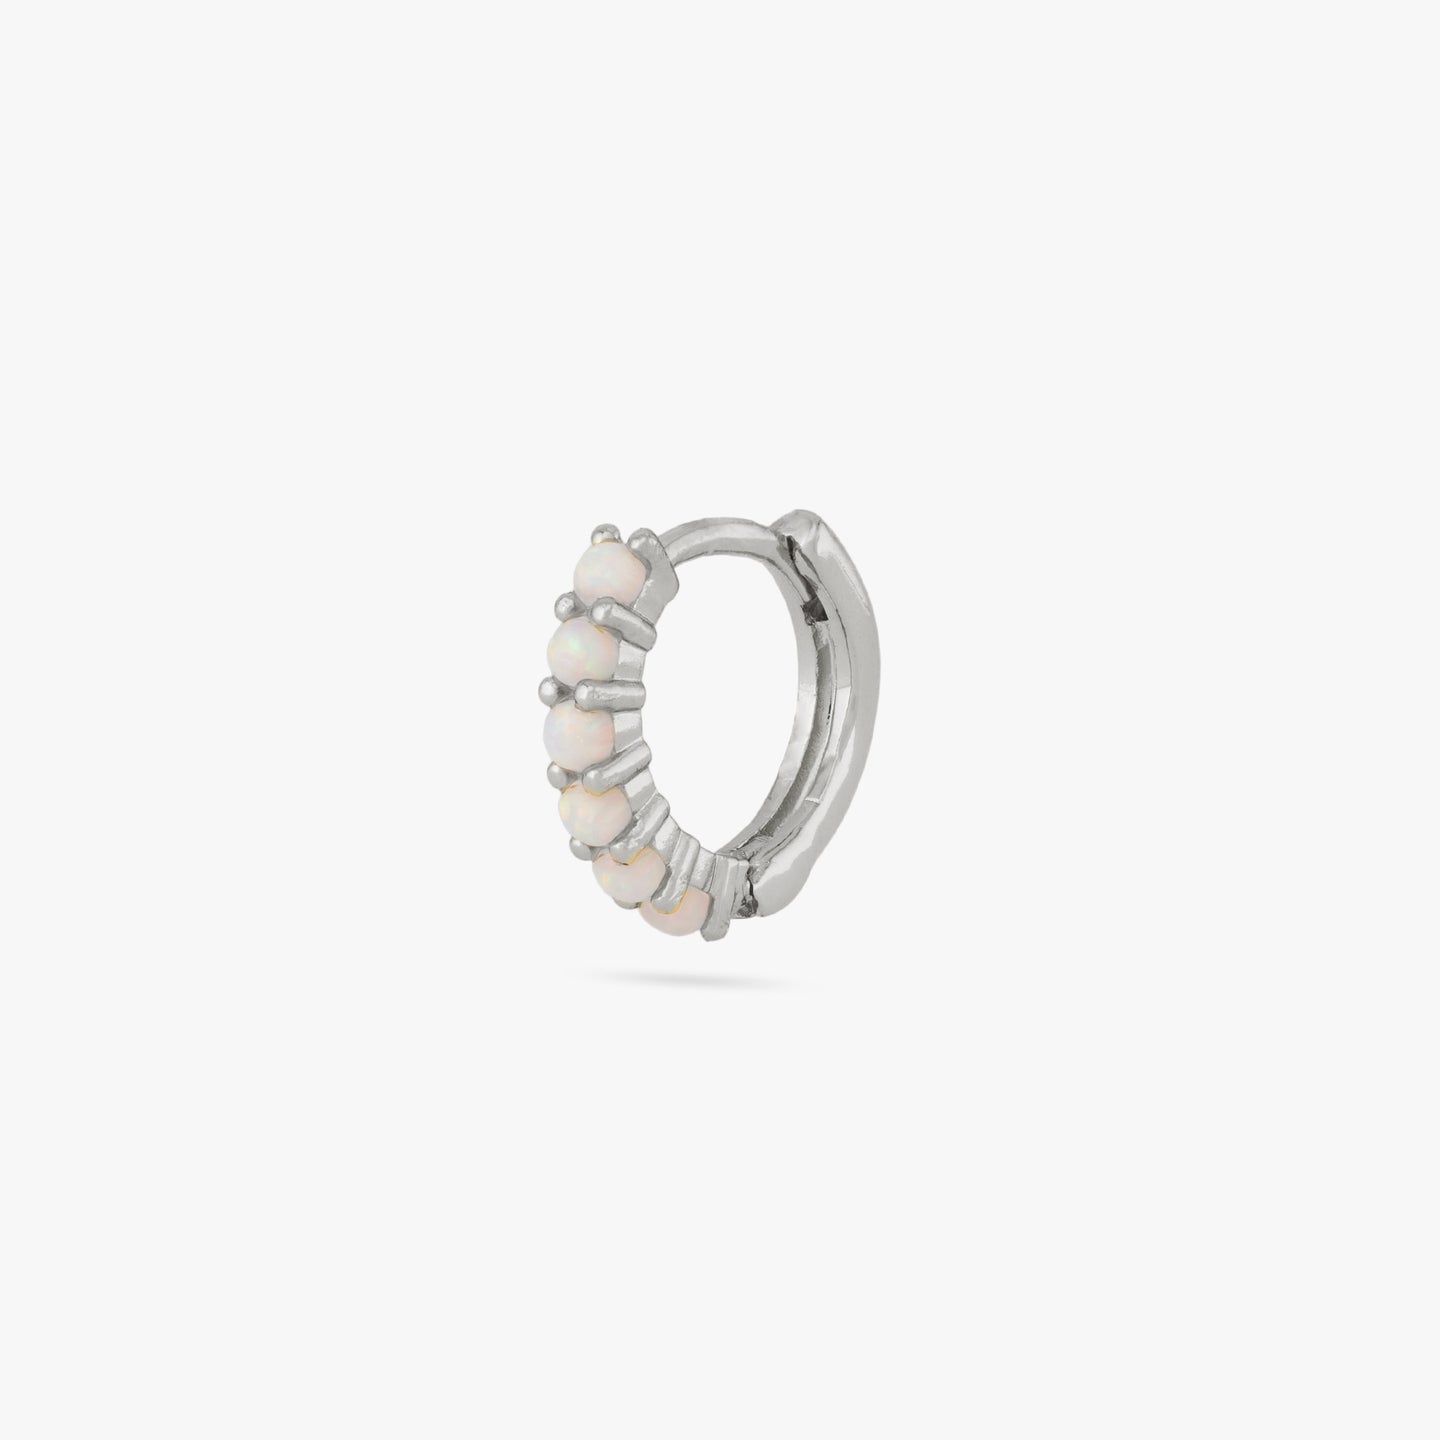 This is a silver huggie with large opal pavé color:null|silver/opal